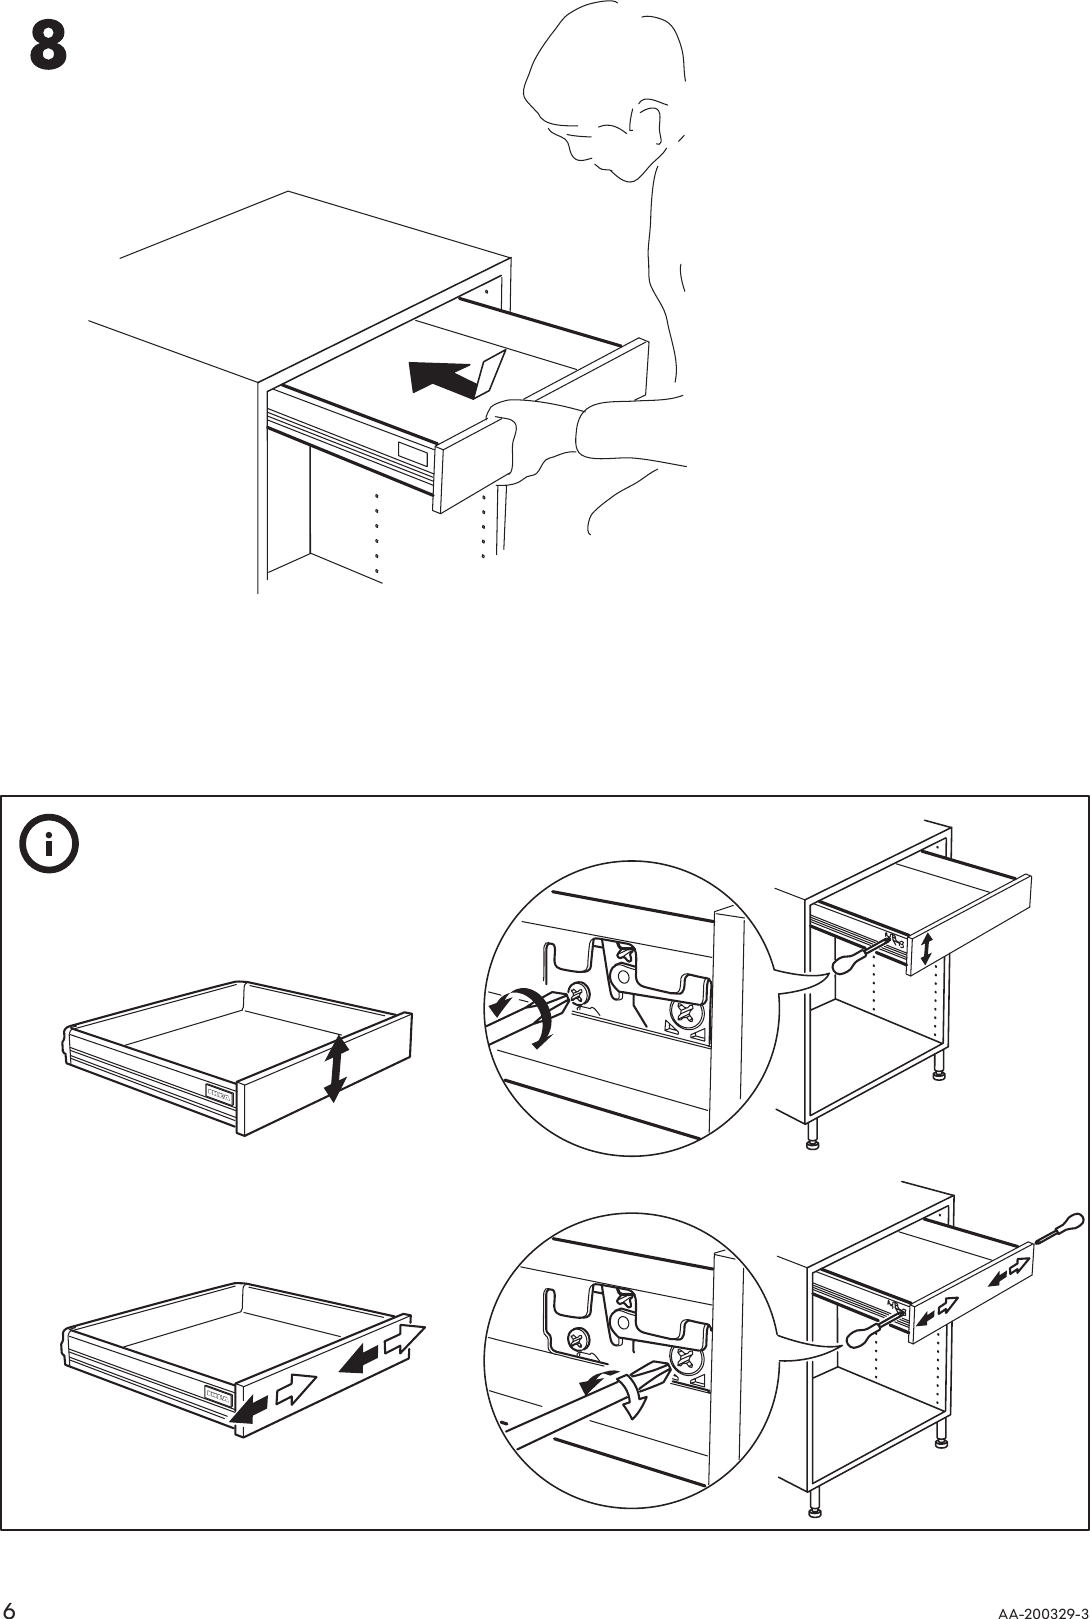 Page 6 of 8 - Ikea Ikea-Rationell-Full-Extending-Drawer-24-Assembly-Instruction